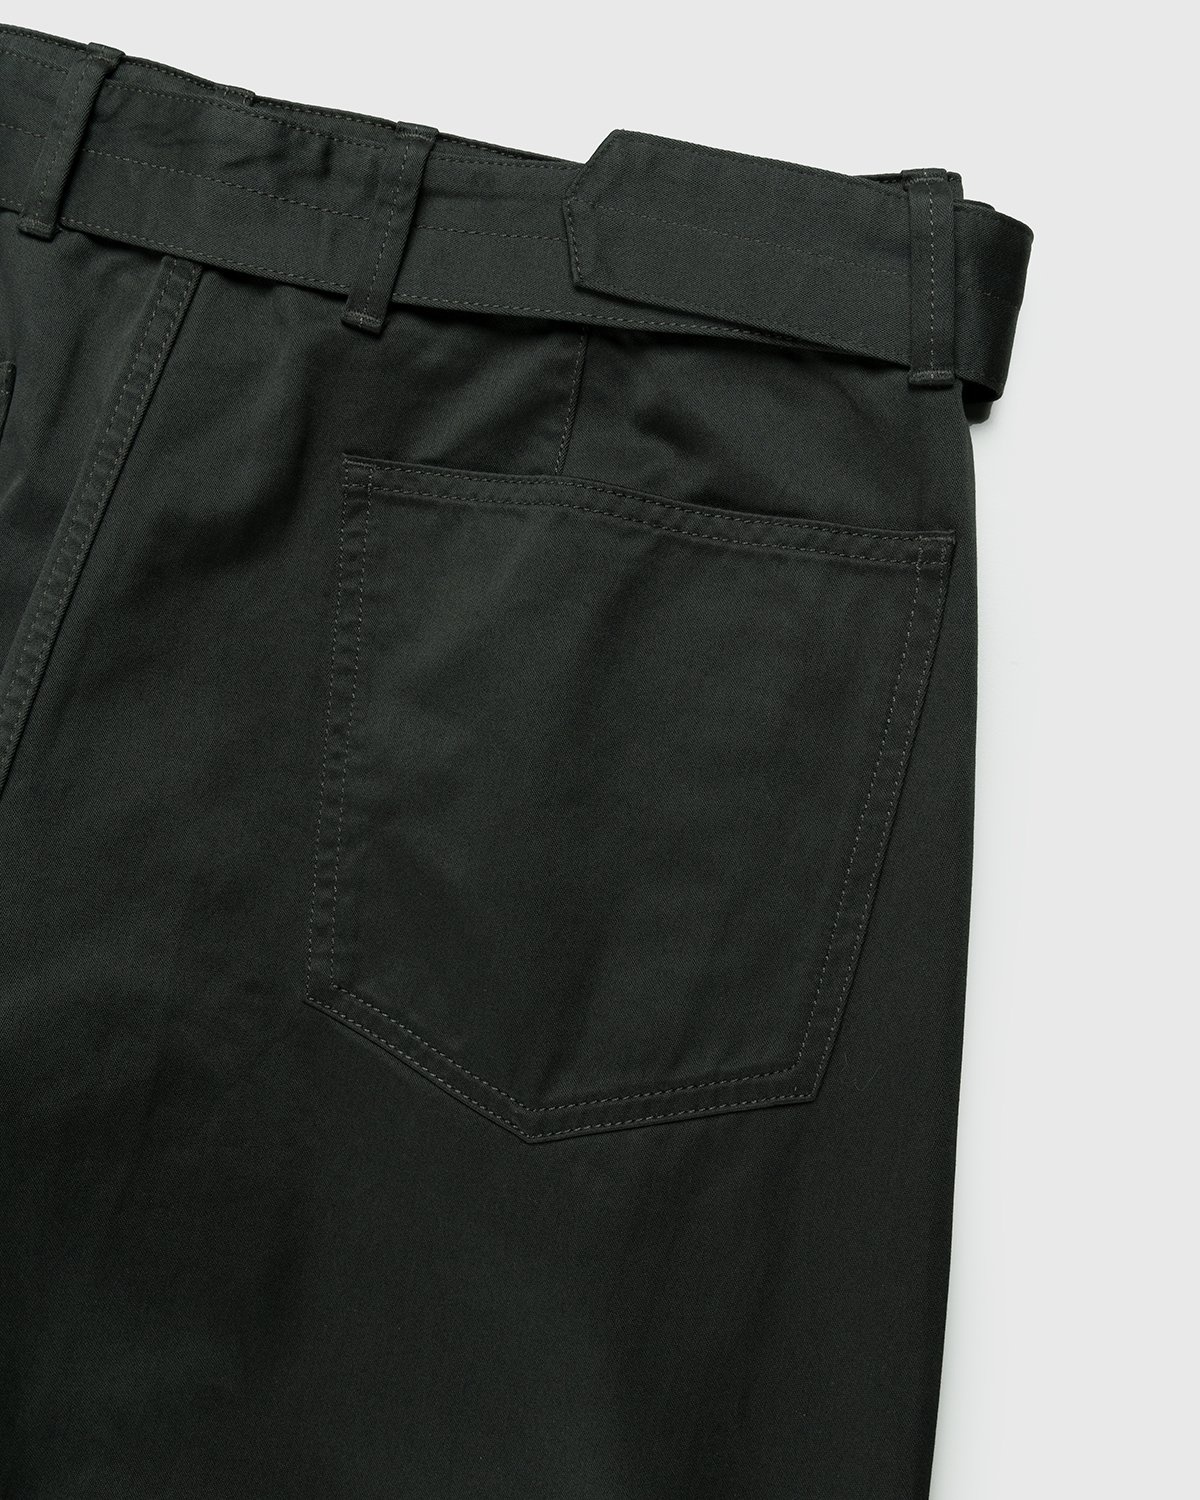 Lemaire – Twisted Belted Pants Dark Slate Green - Pants - Grey - Image 3